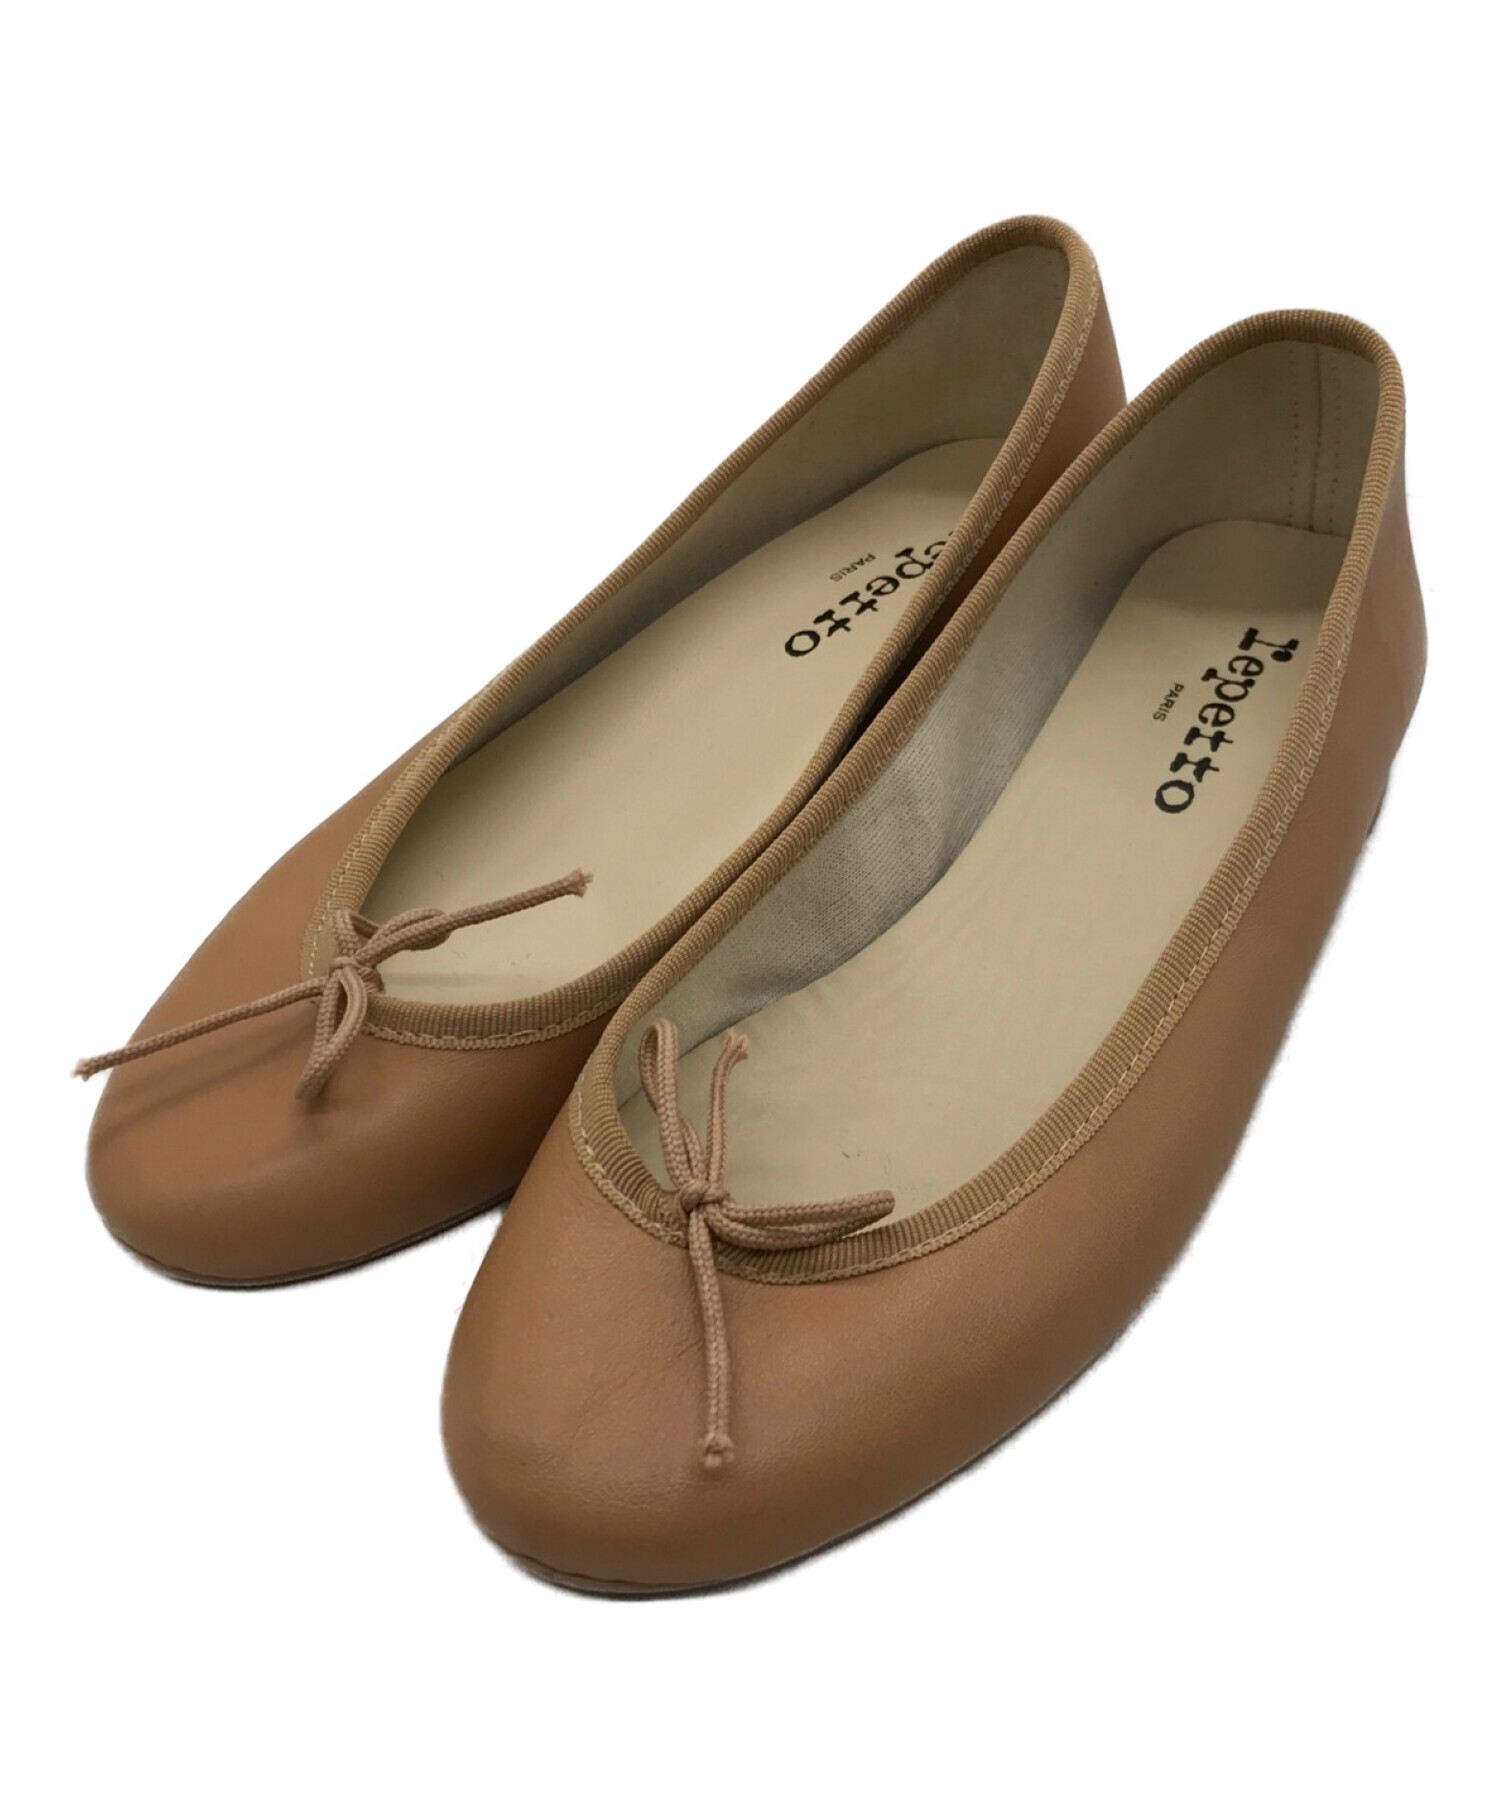 Repetto レペット パンプス